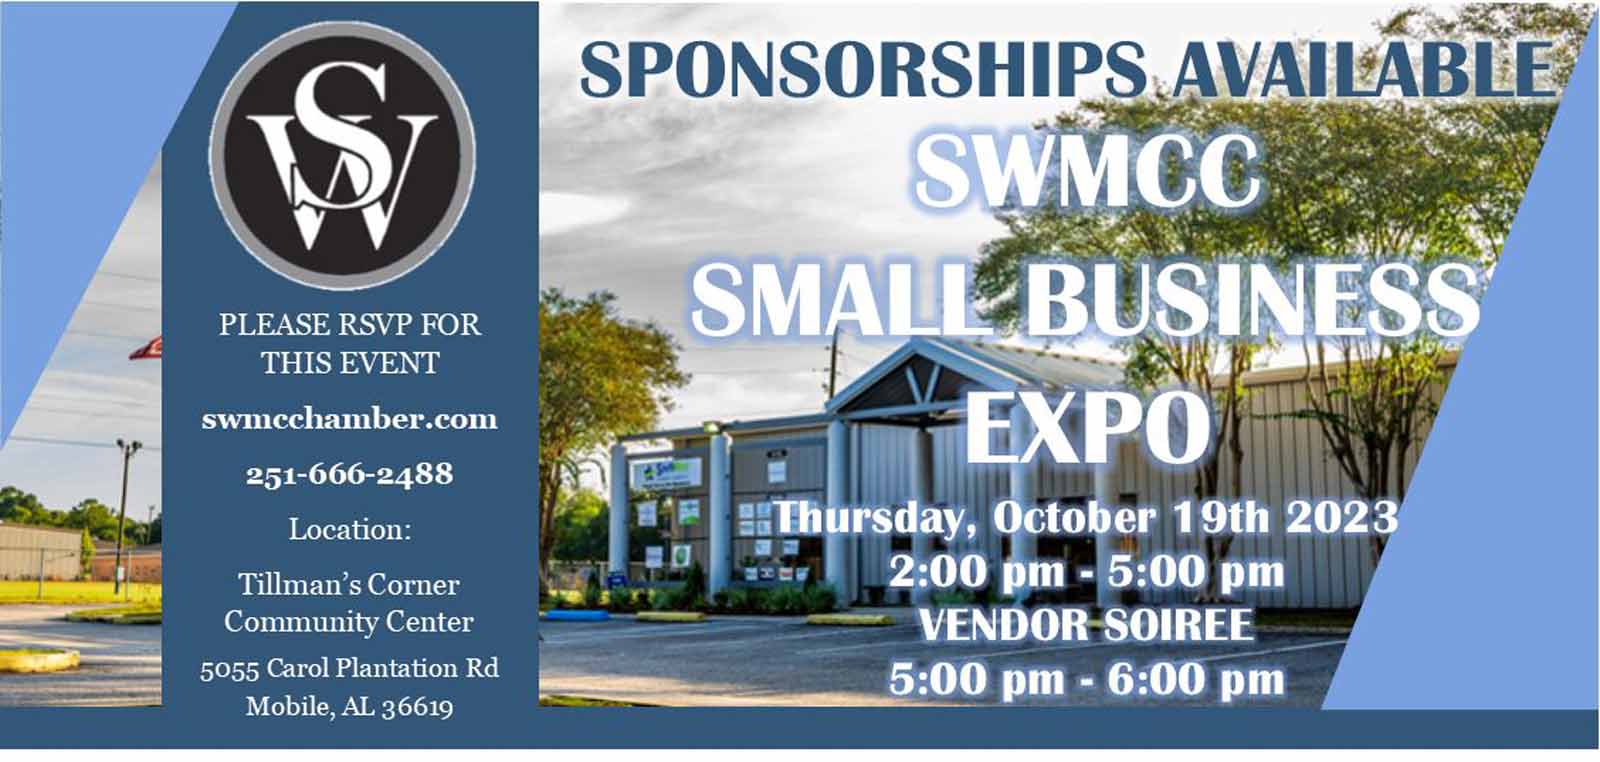 SWMCC Business Expo Coming Up